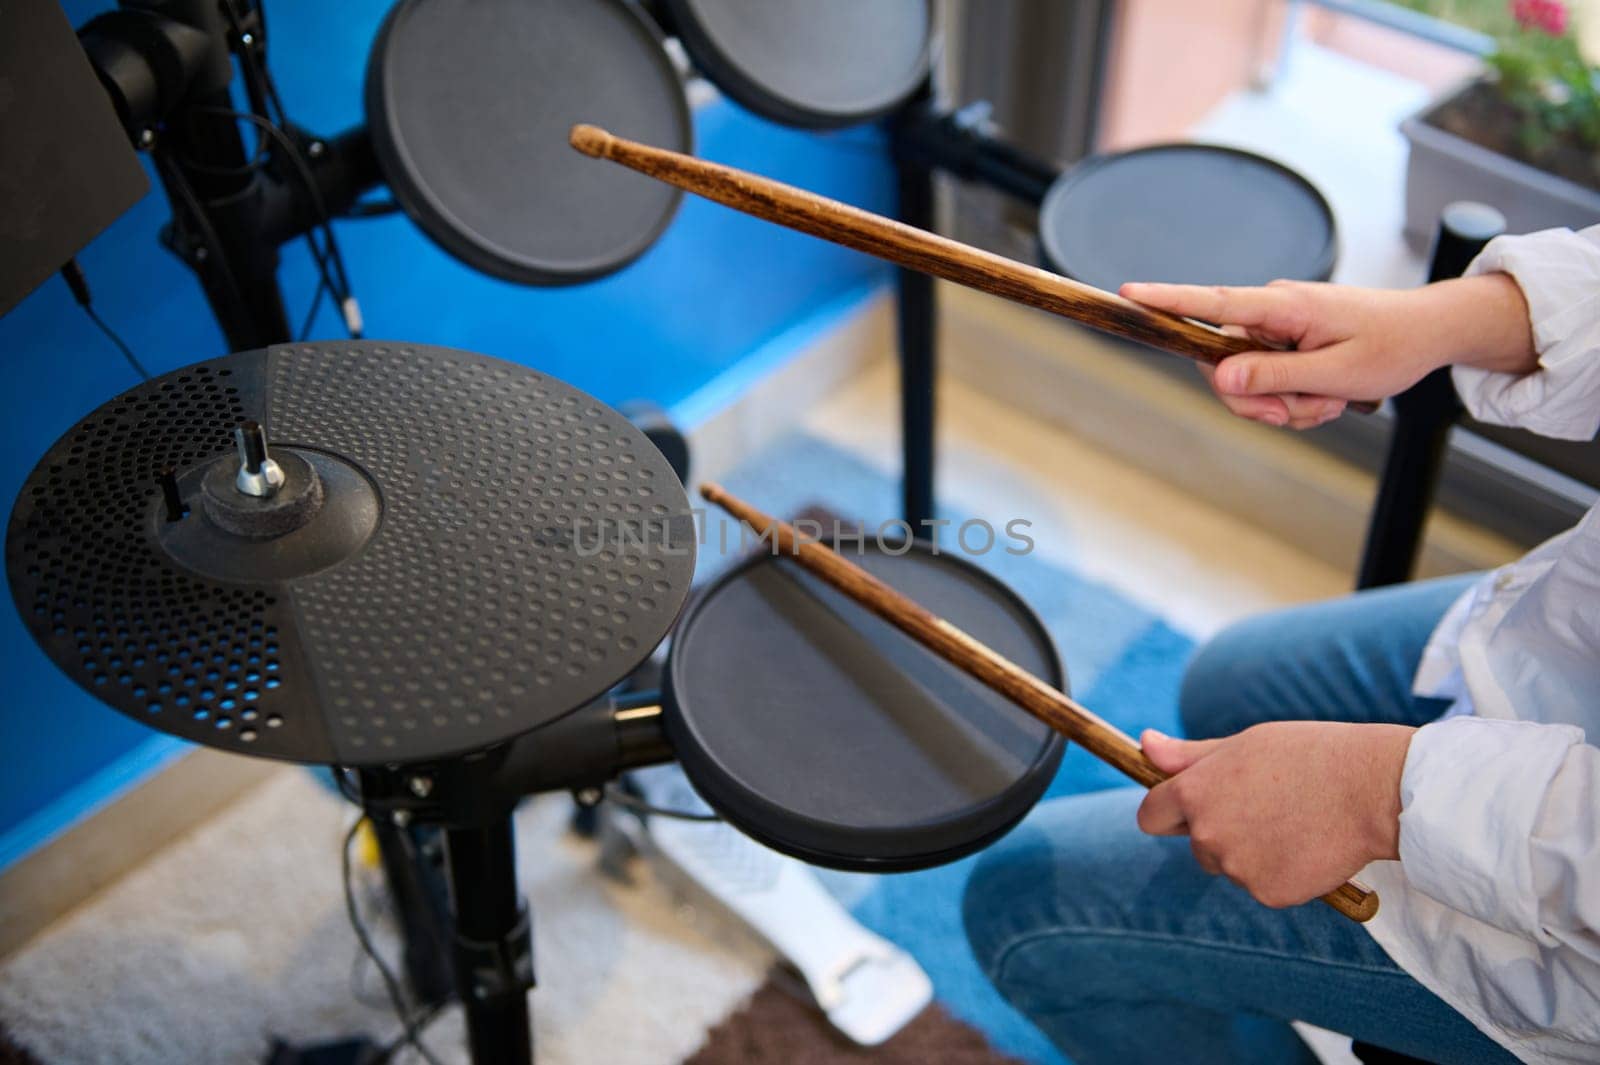 Teenage drummer hands. Teen boy playing drums in music studio. Top view of boy musician beating on the black cymbals with drumsticks, performing sound playing on drum set. Close up top view by artgf